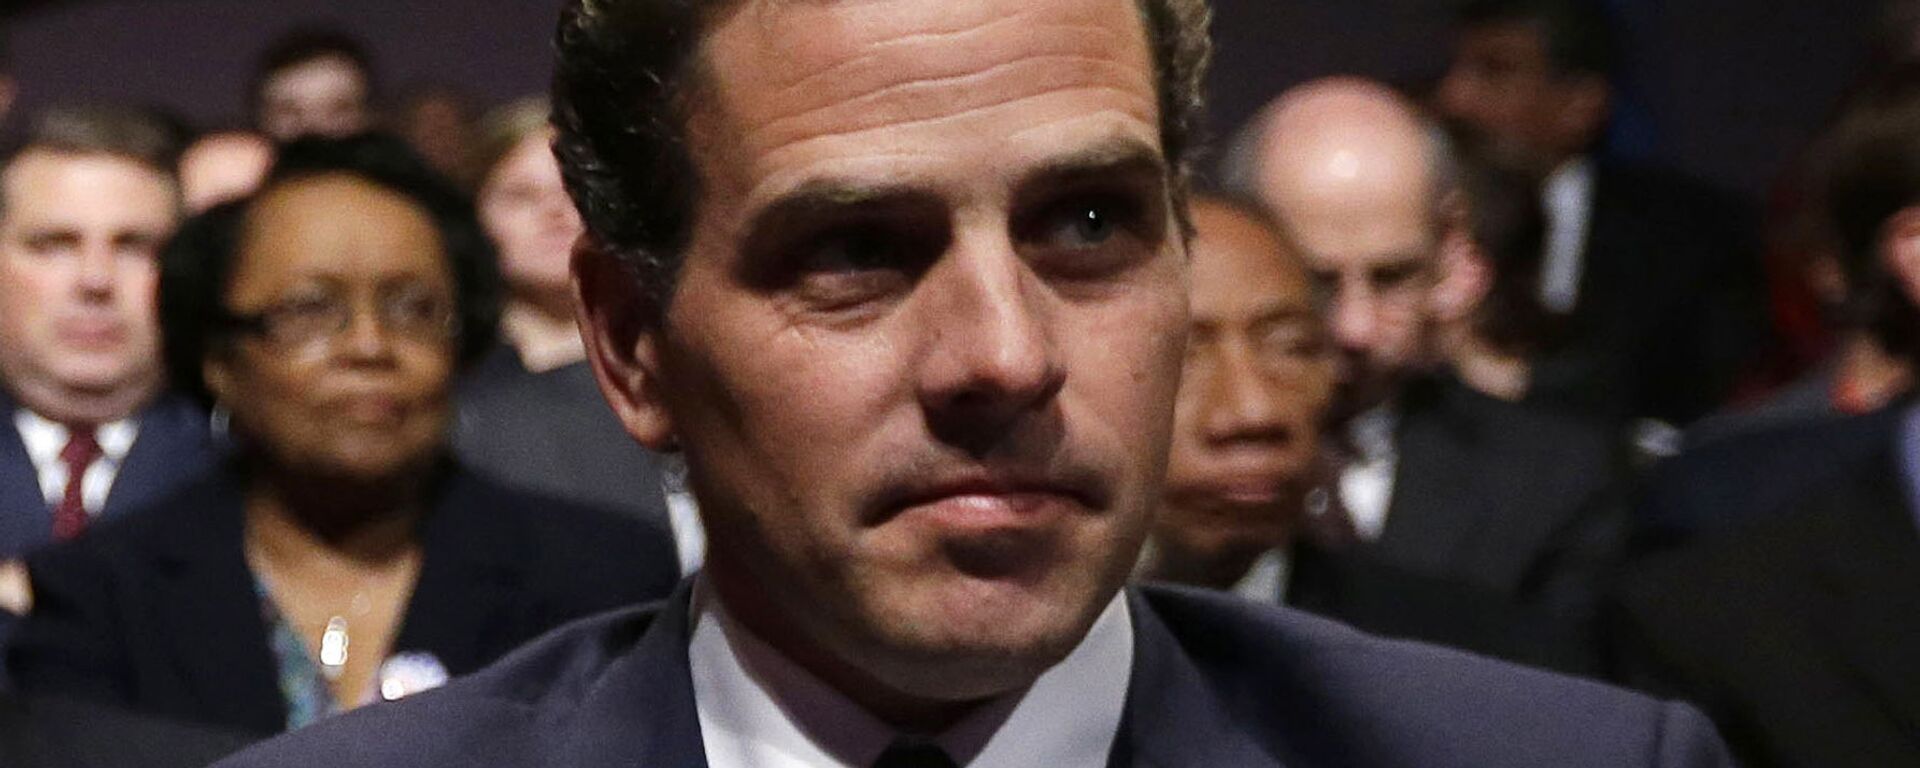 In this Oct. 11, 2012, file photo, Hunter Biden waits for the start of the his father's, Vice President Joe Biden's, debate at Centre College in Danville, Ky. In 2014, then-Vice President Joe Biden was at the forefront of American diplomatic efforts to support Ukraine's fragile democratic government as it sought to fend off Russian aggression and root out corruption. So it raised eyebrows when Biden's son Hunter was hired by a Ukrainian gas company. President Donald Trump prodded Ukraine's president to help him investigate any corruption related to Joe Biden, now one of the top Democrats seeking to defeat Trump in 2020. - Sputnik International, 1920, 01.11.2020